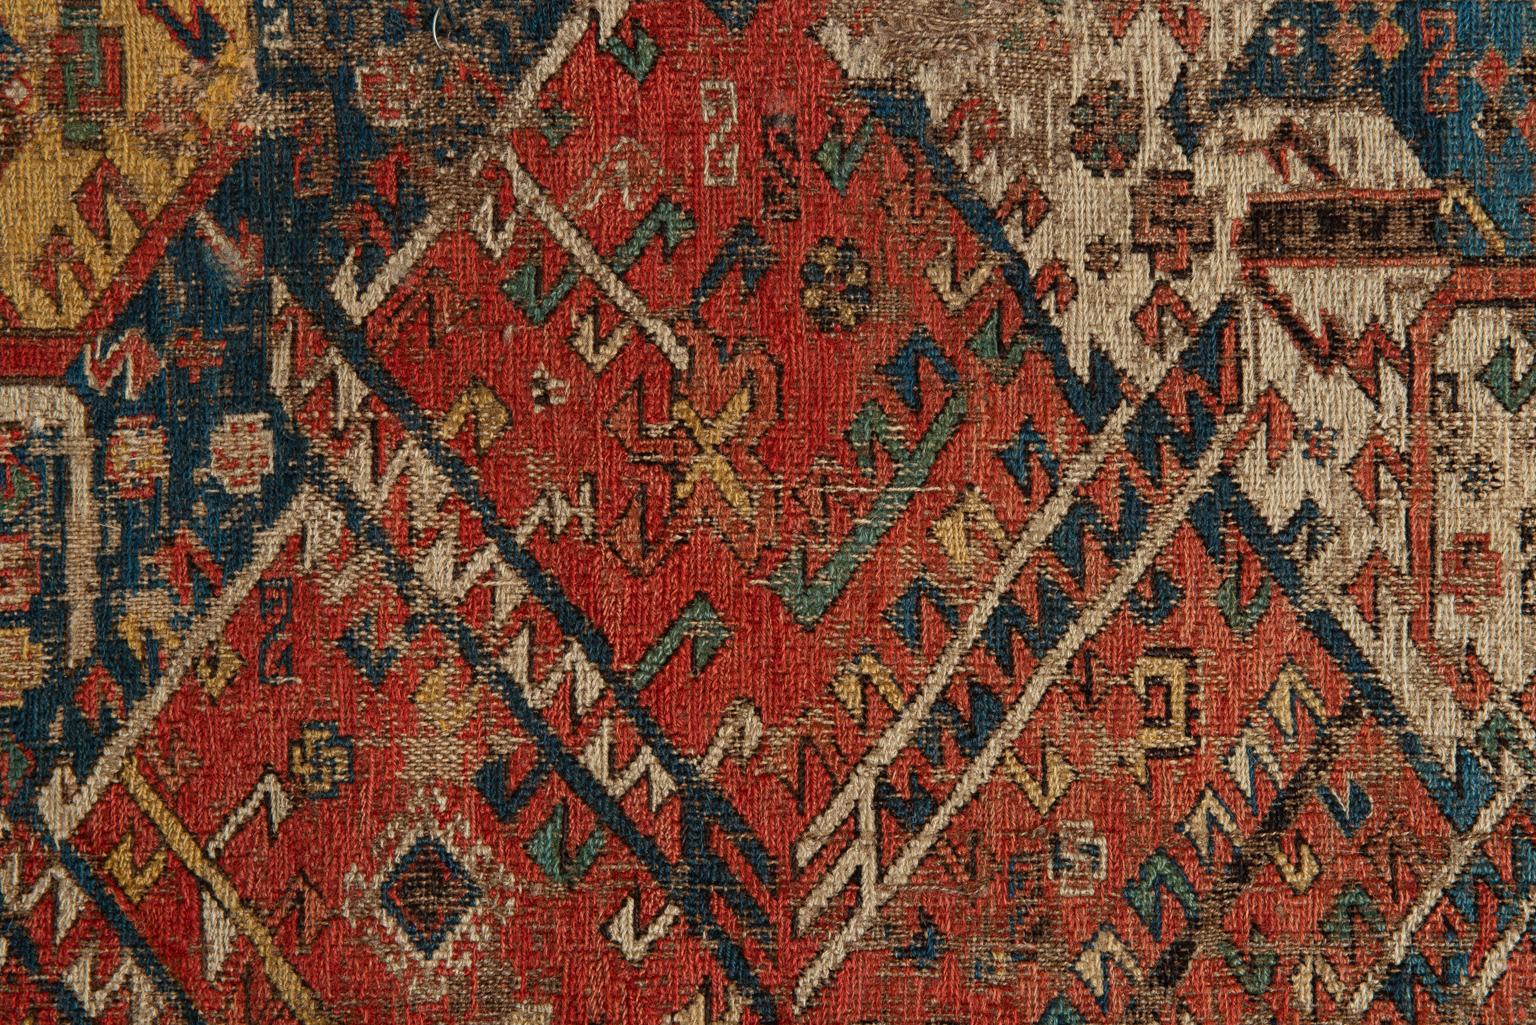 Wool Fragment of Antique Sumakh Carpet with Original Colors For Sale